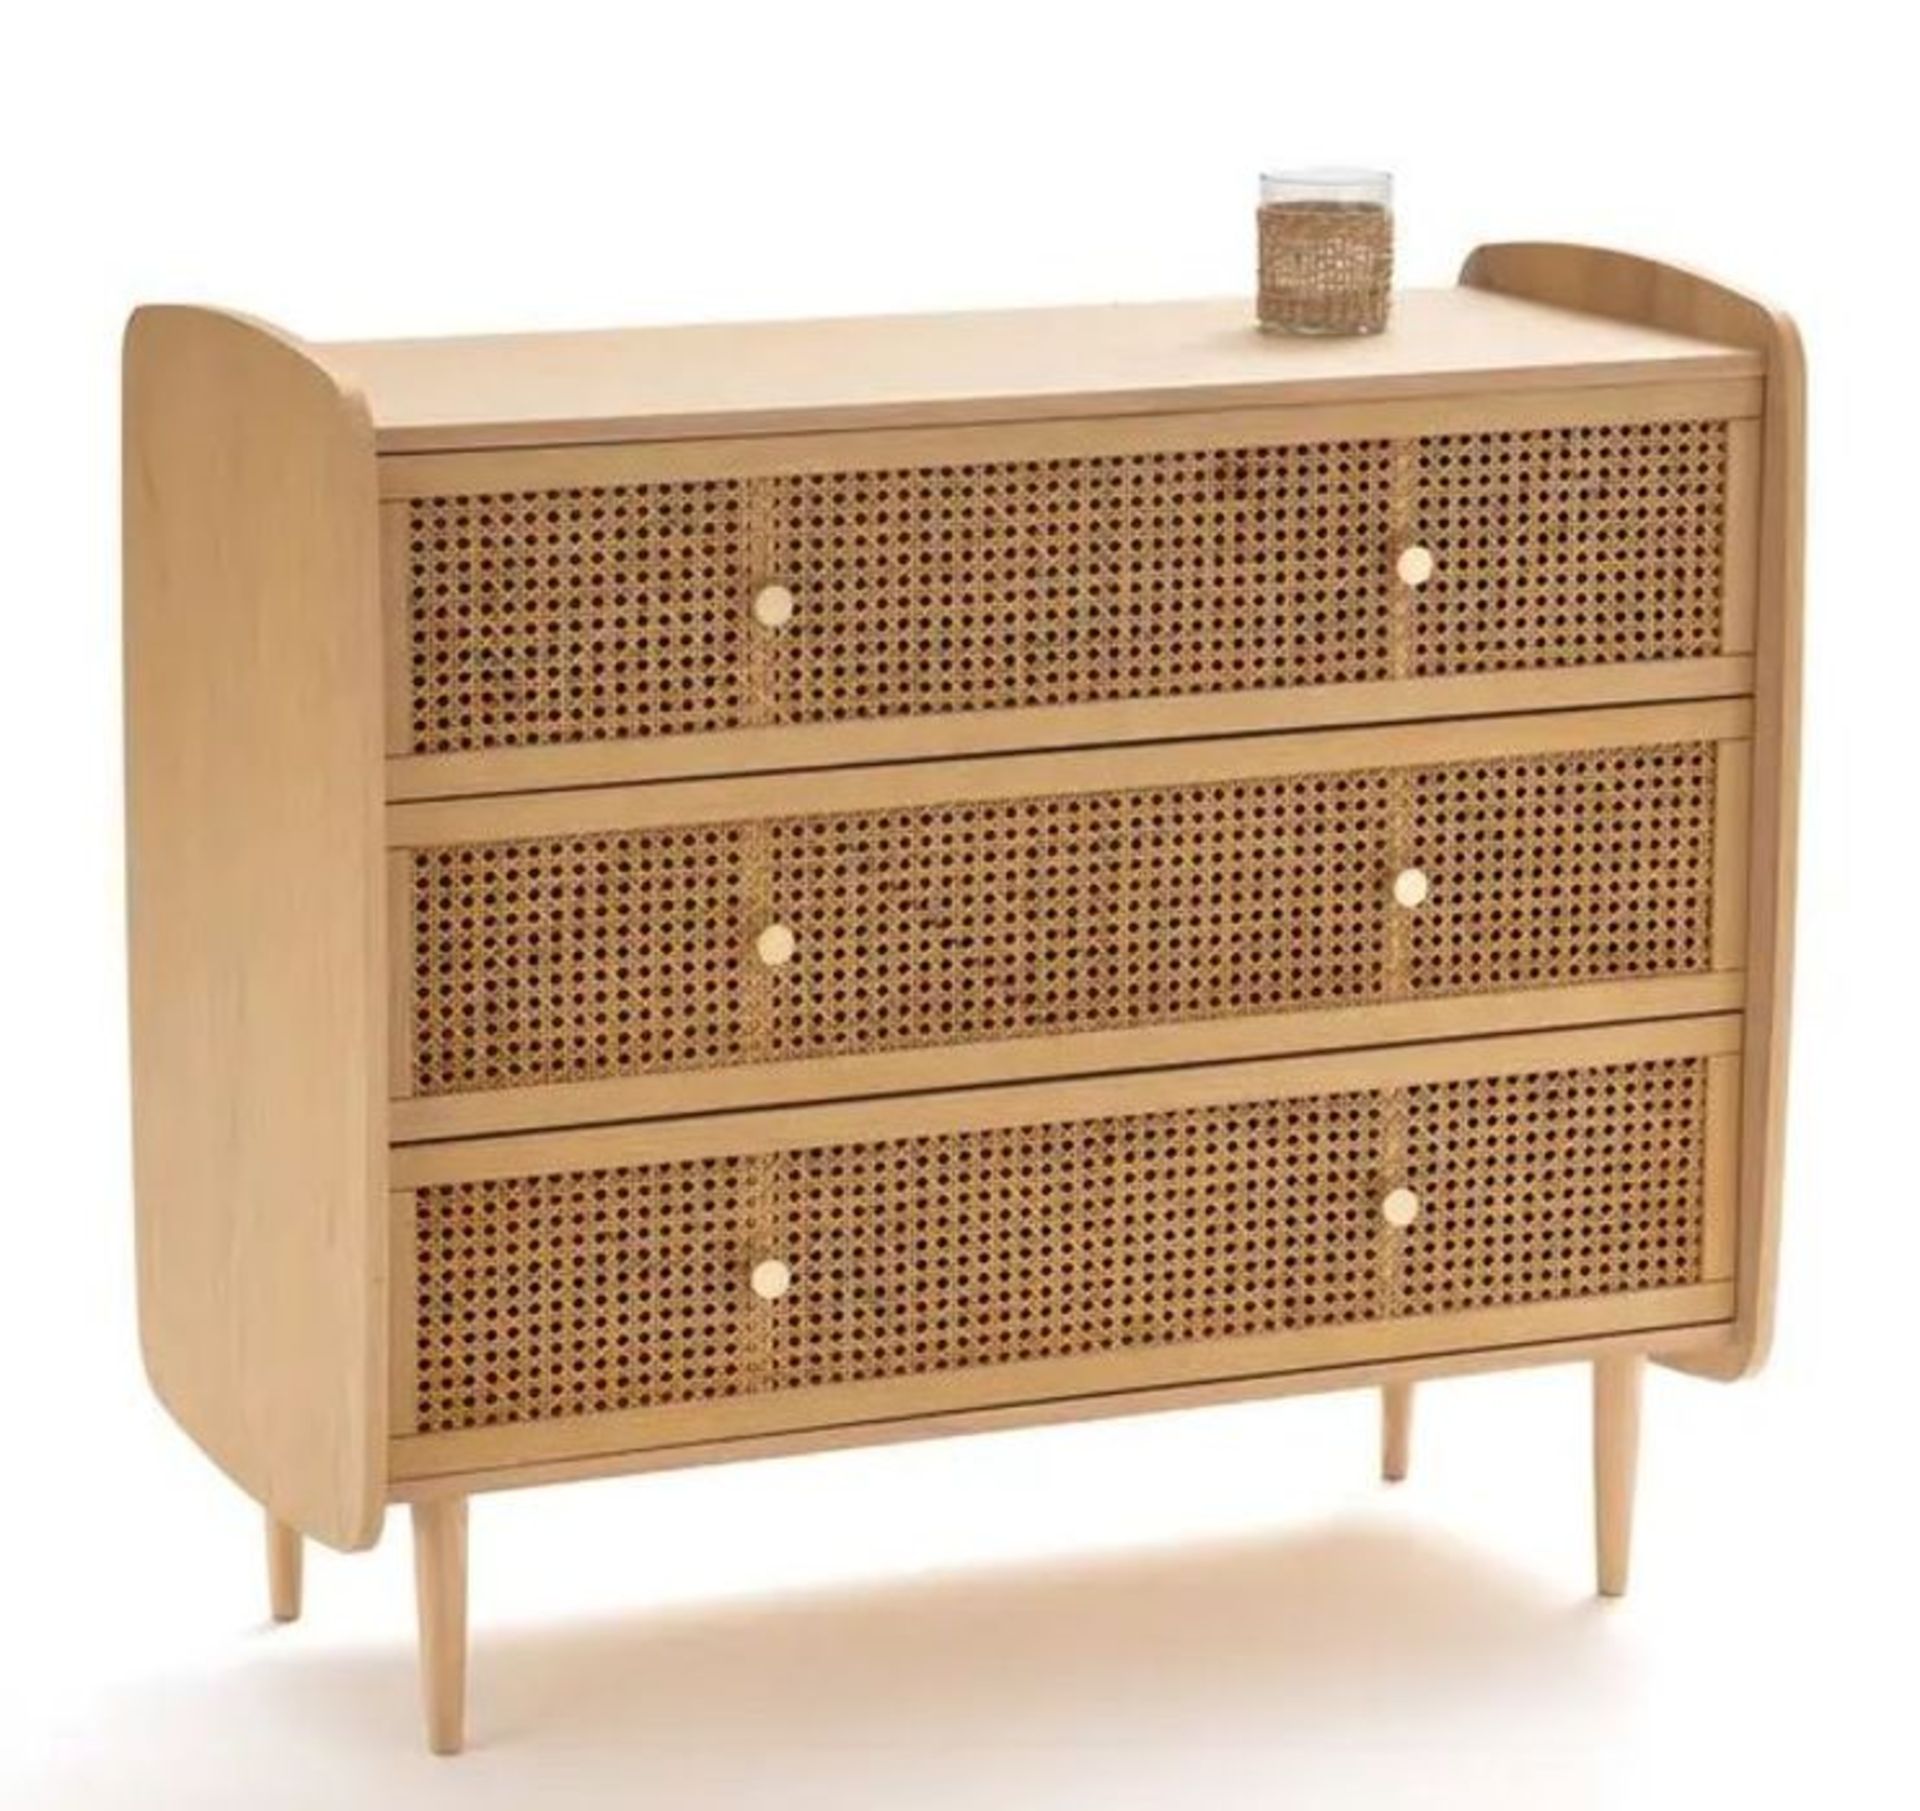 LA REDOUTE TEMPA CHEST OF 2 DRAWERS IN RATTAN CANE